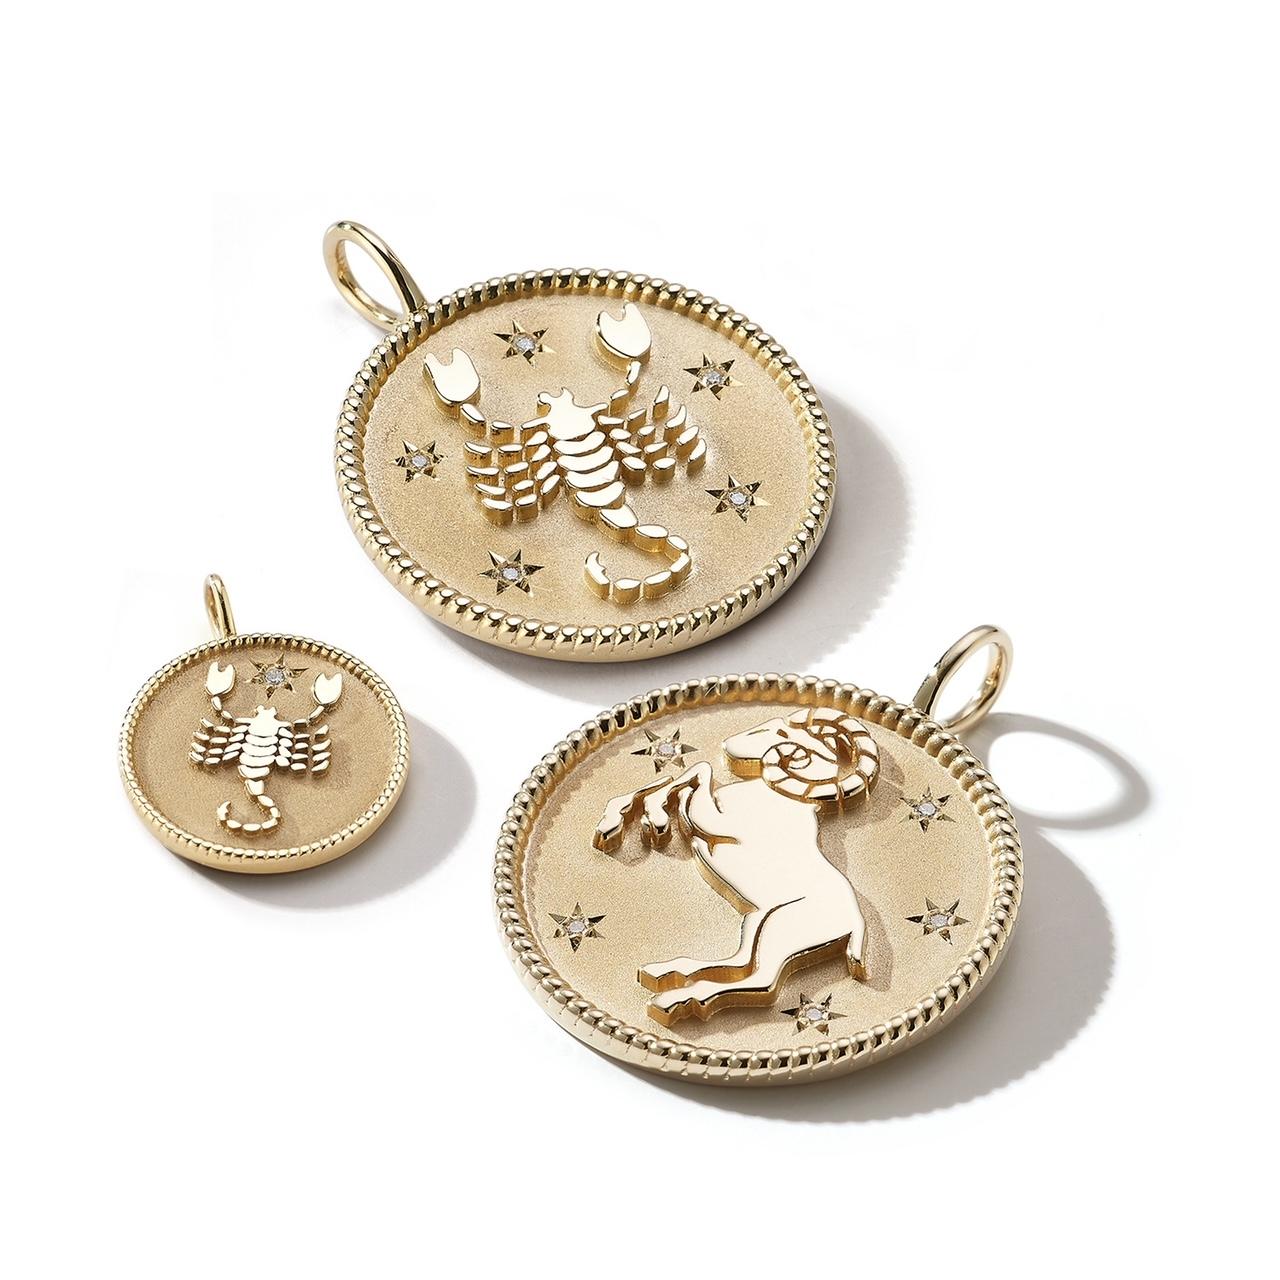 Garland Collection's vintage inspired zodiac medallions are custom and handmade to order in New York City by our team of master jewelers. A polished rope border on each medallion surrounds a matte gold background, while handset diamonds in a